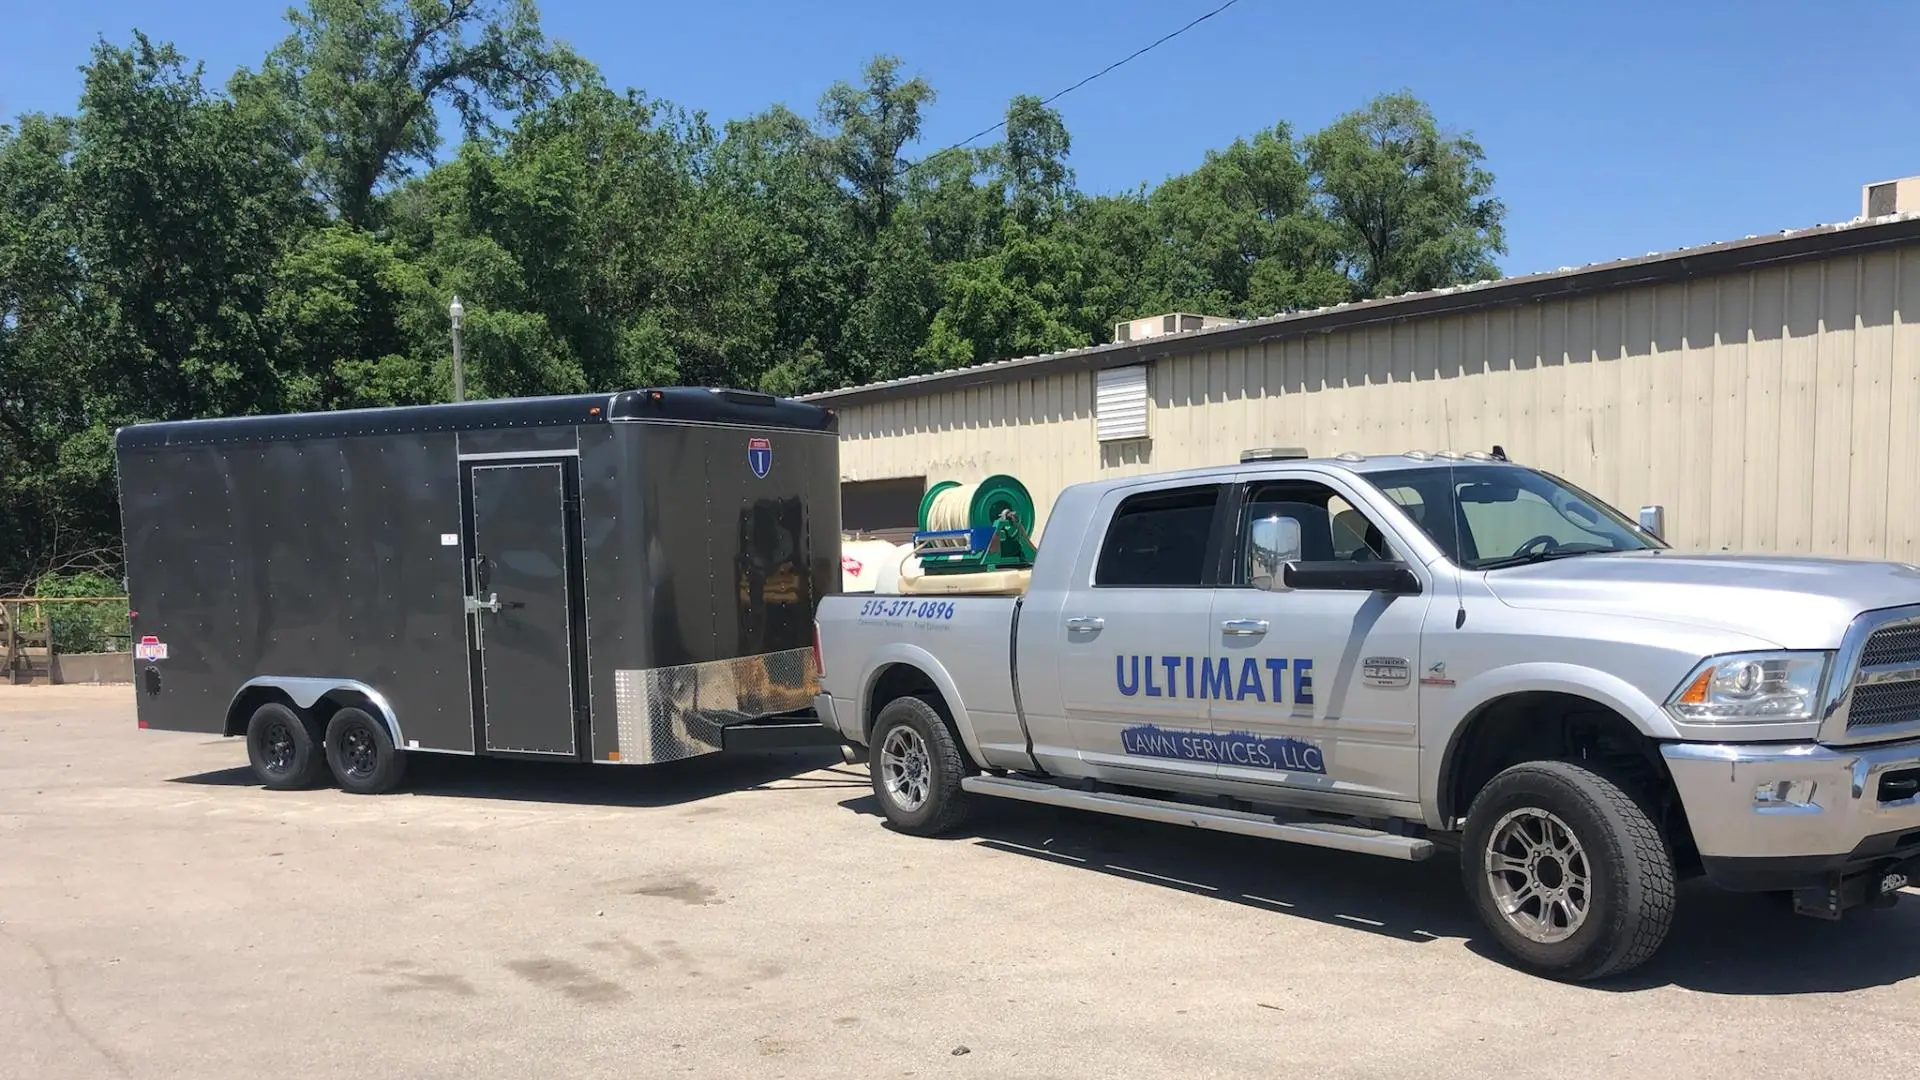 Ultimate service truck with trailer attached in Urbandale, IA.